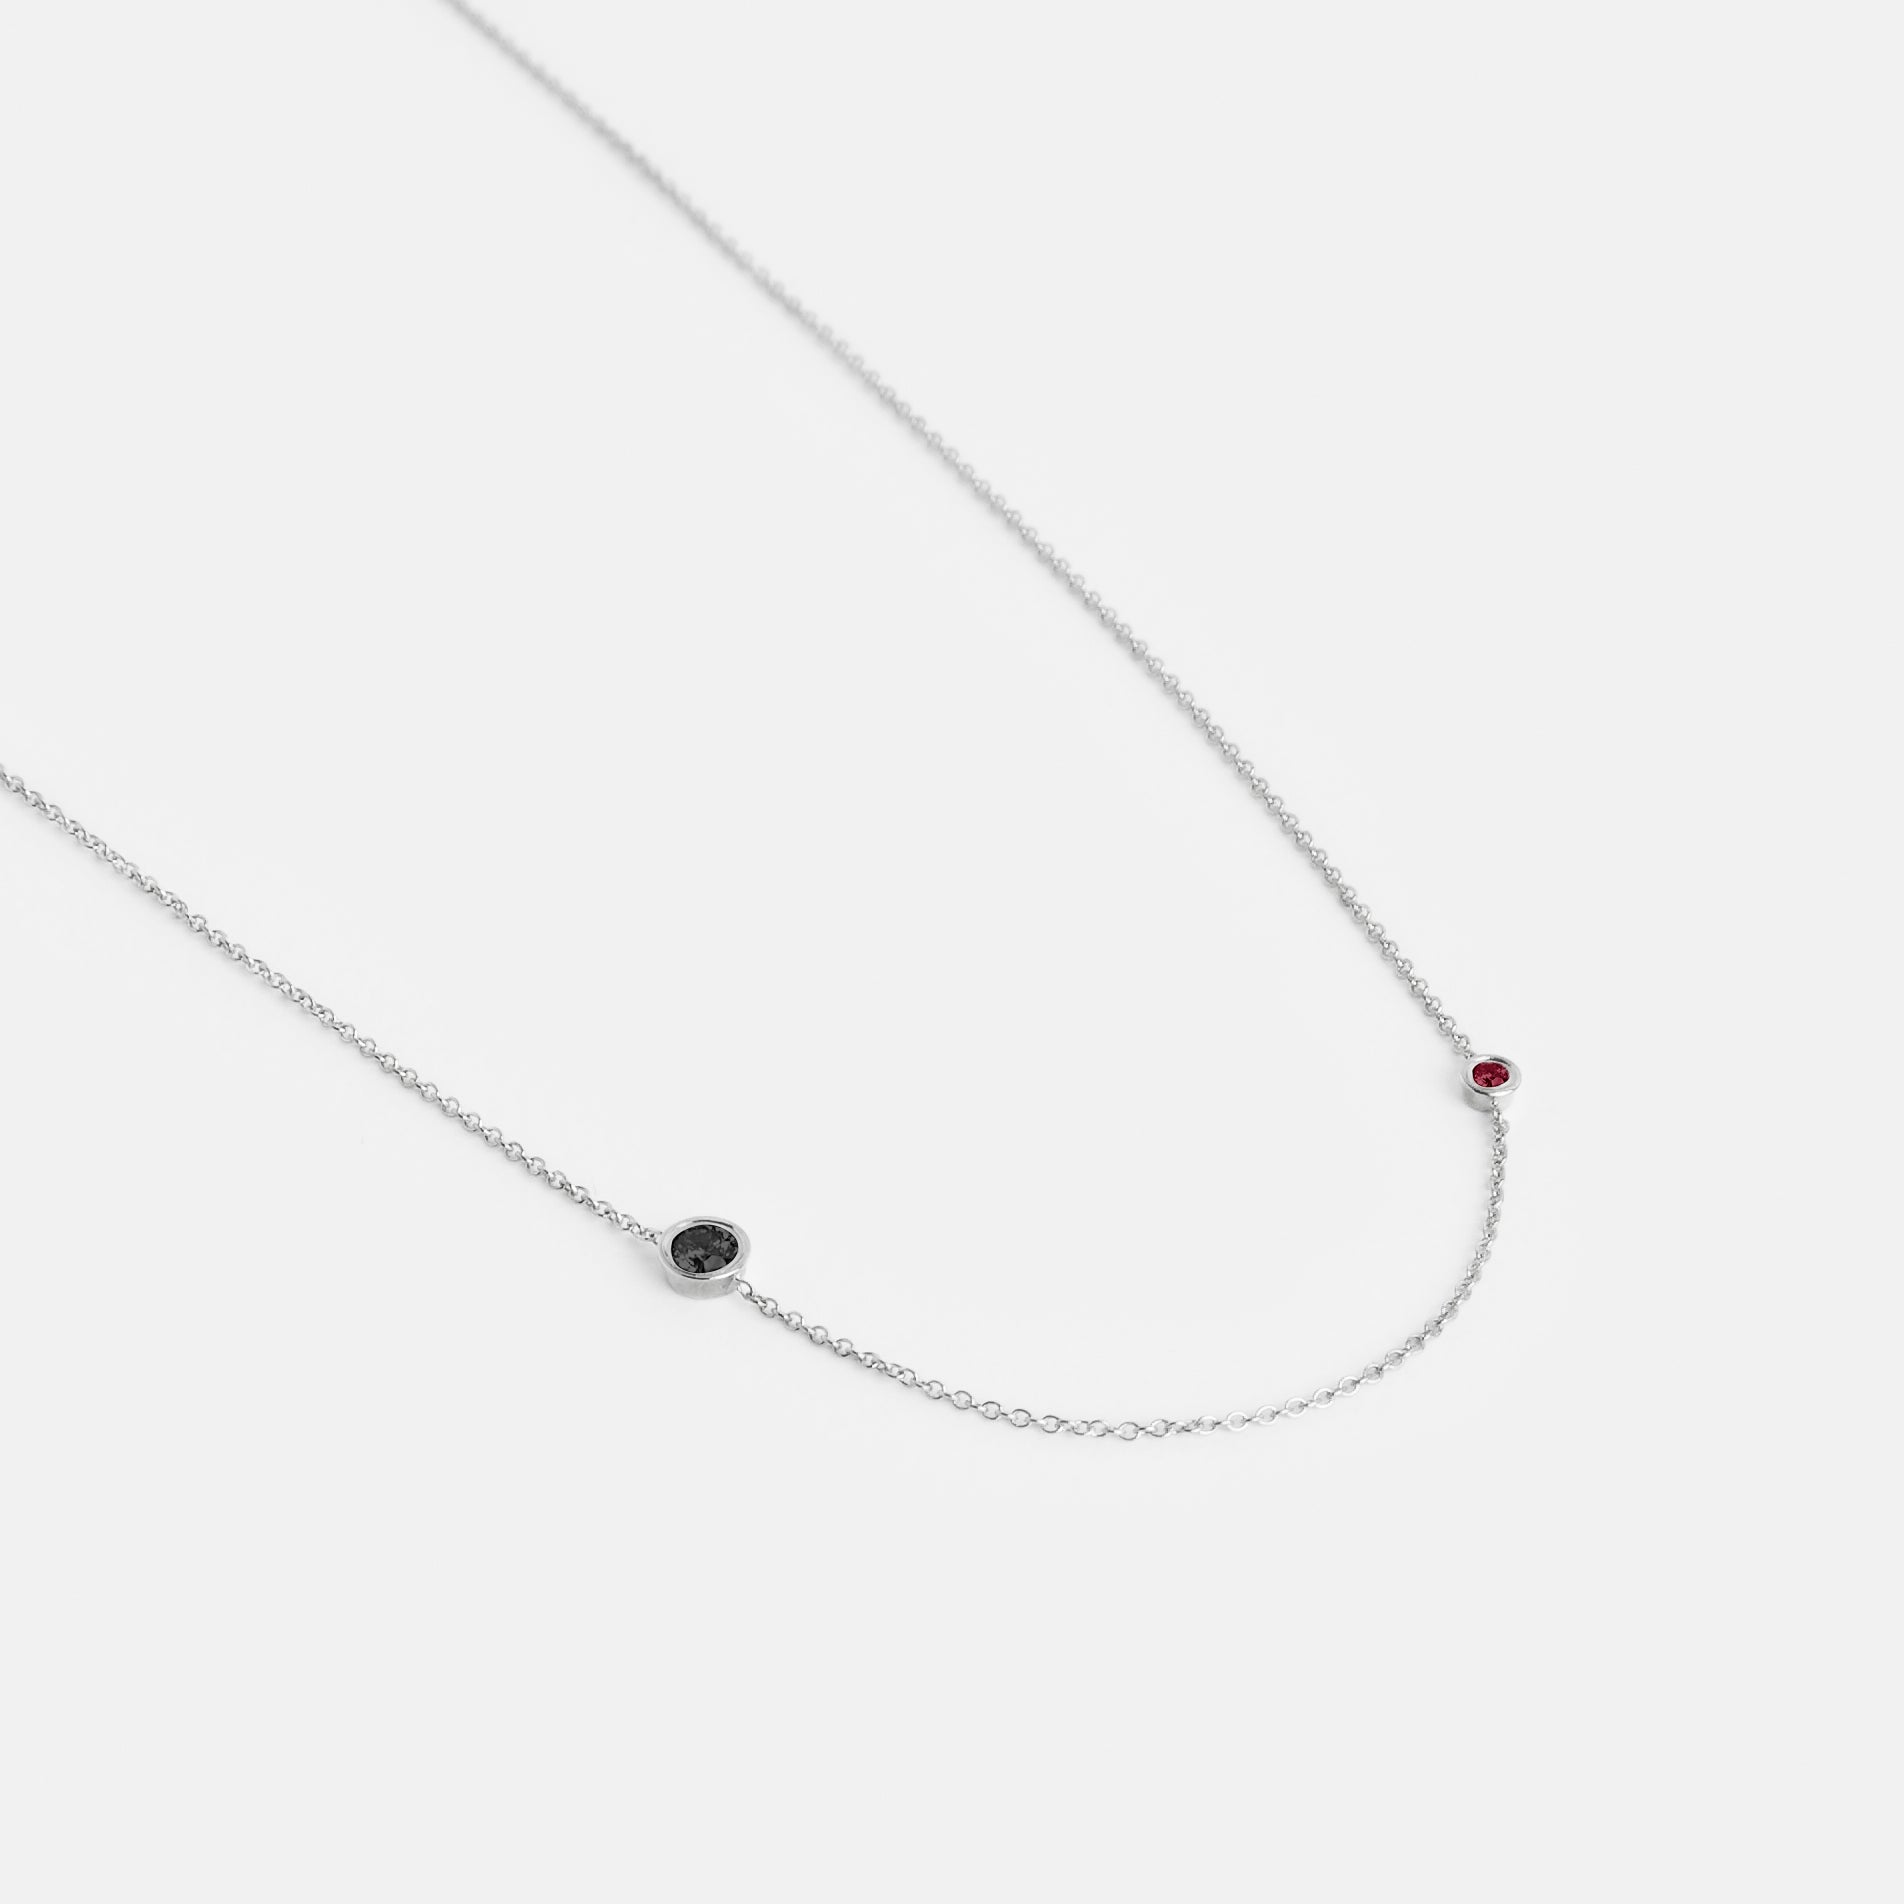 Iba Minimalist Necklace in 14k White Gold set with Black Diamond and Ruby By SHW Fine Jewelry NYC